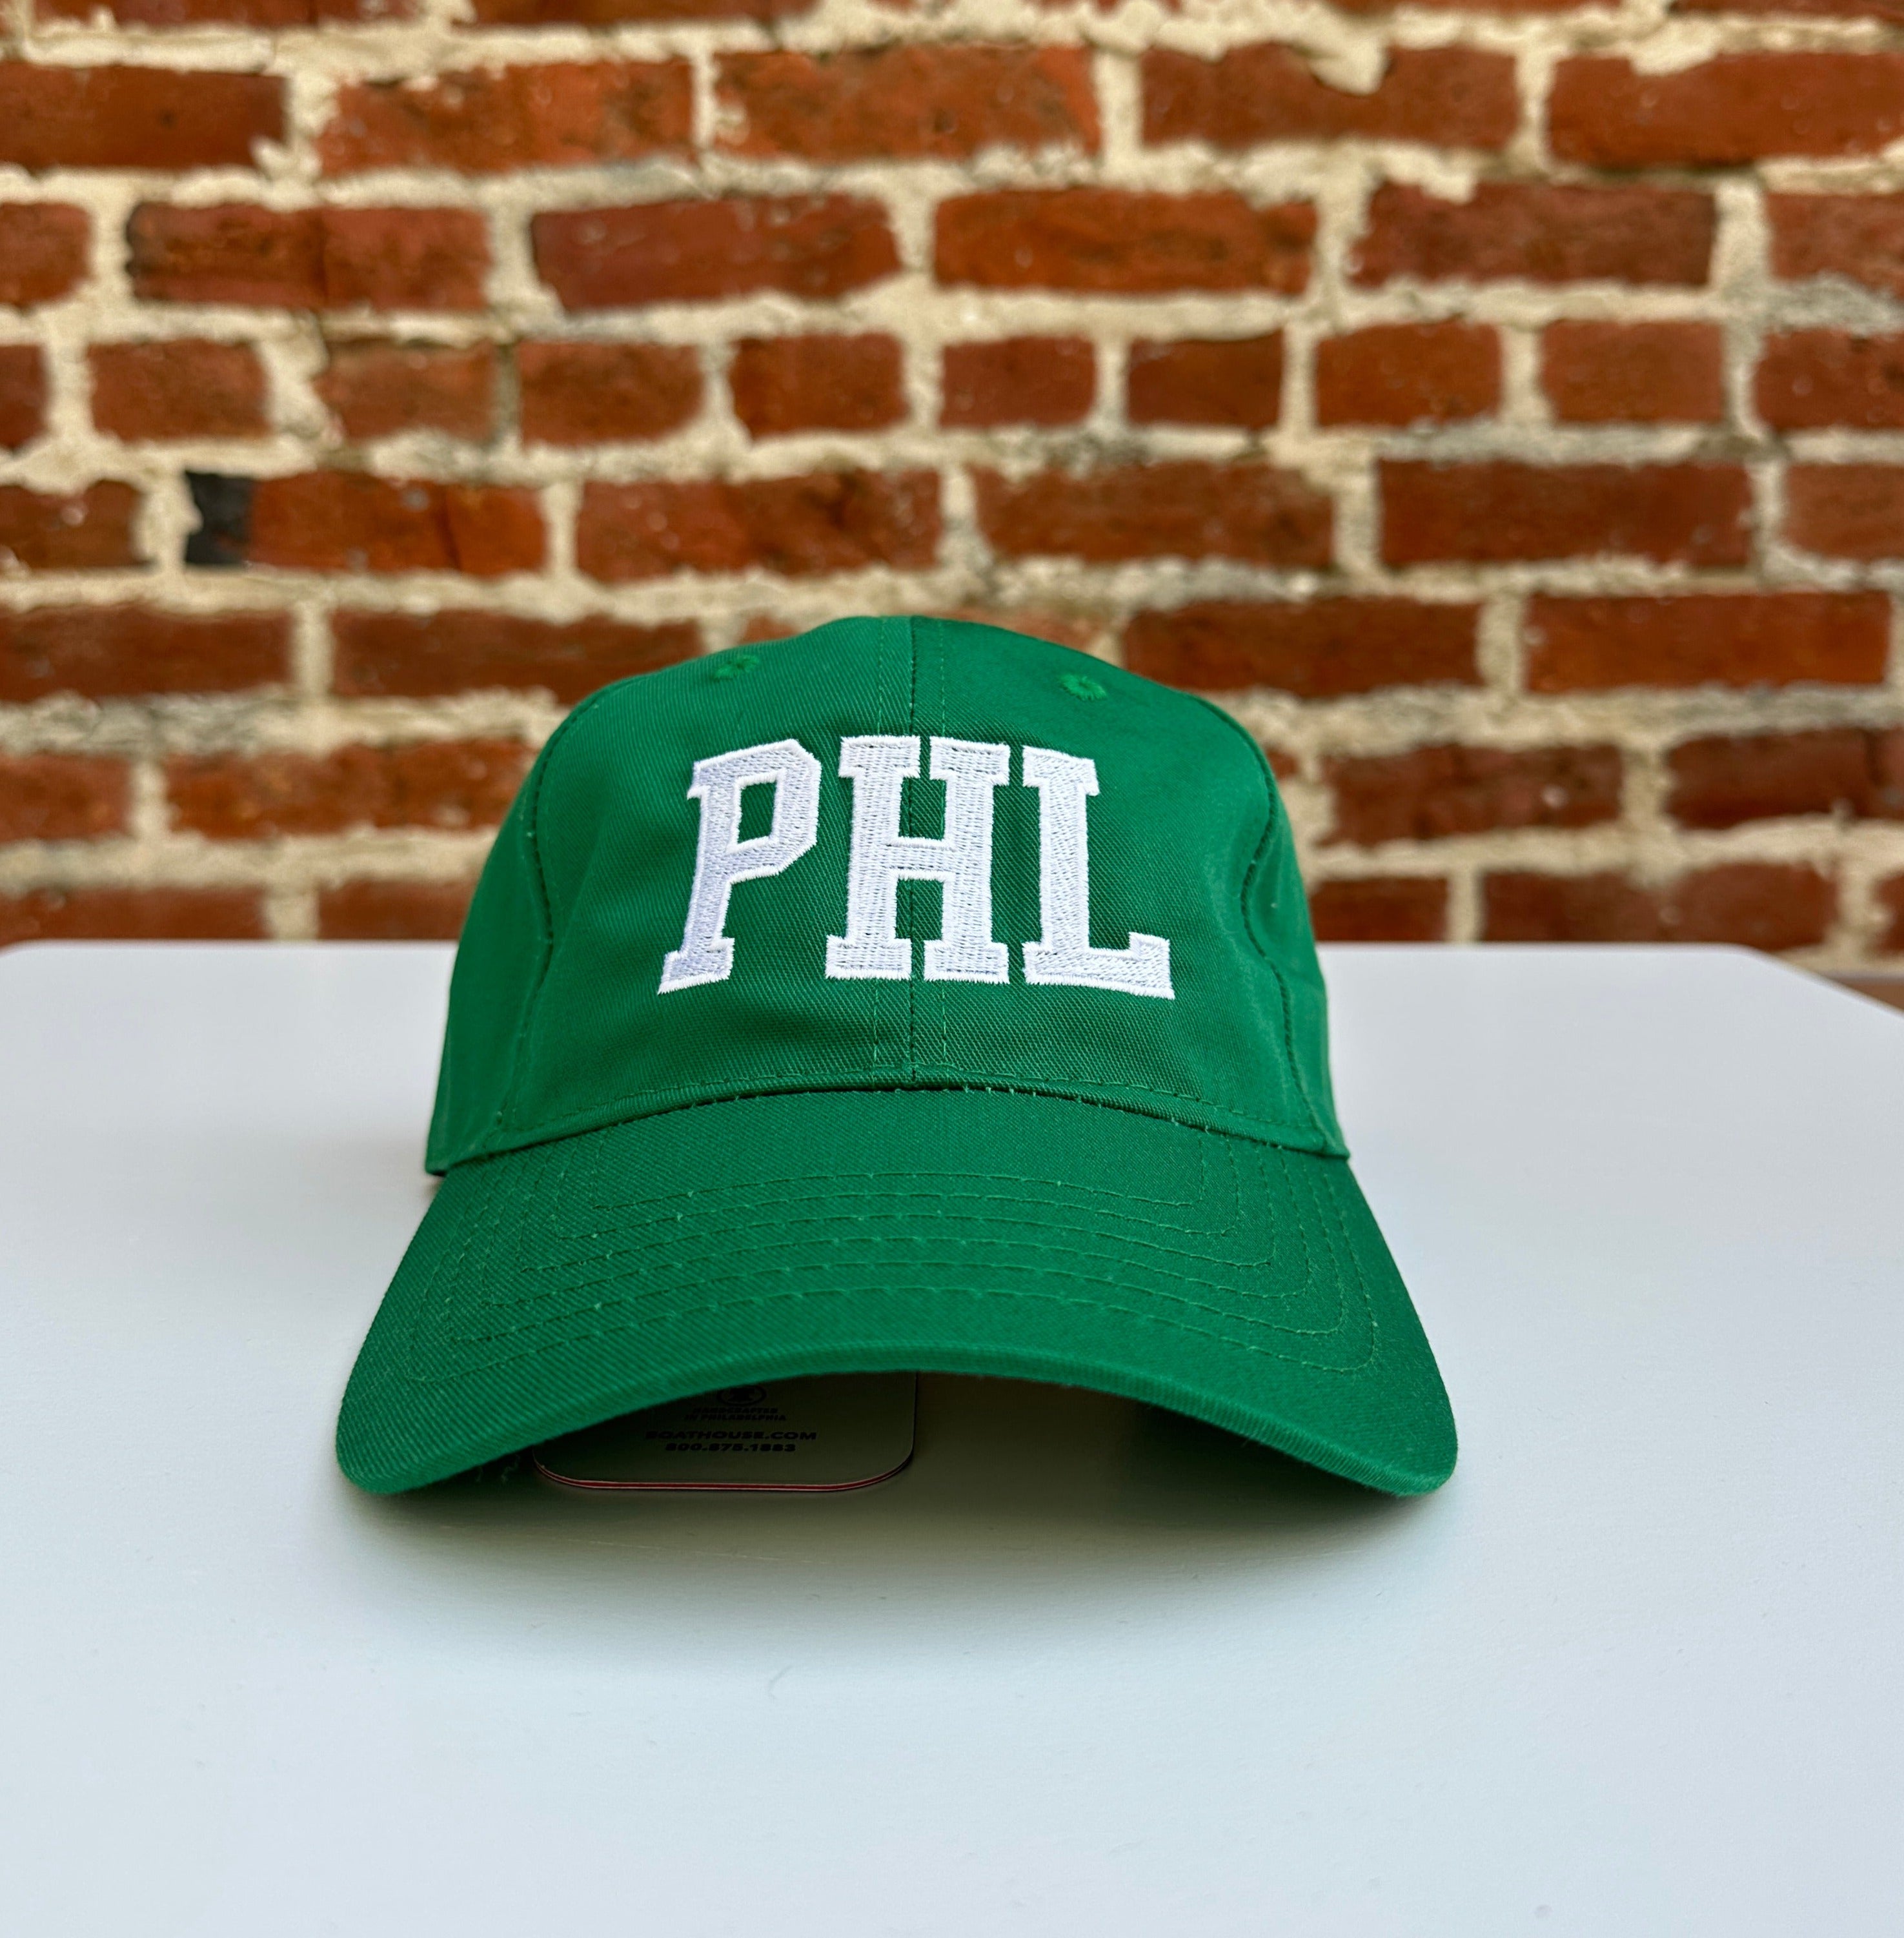 Shop Our PHL Collection - Philly Gifts & Spirit Wear